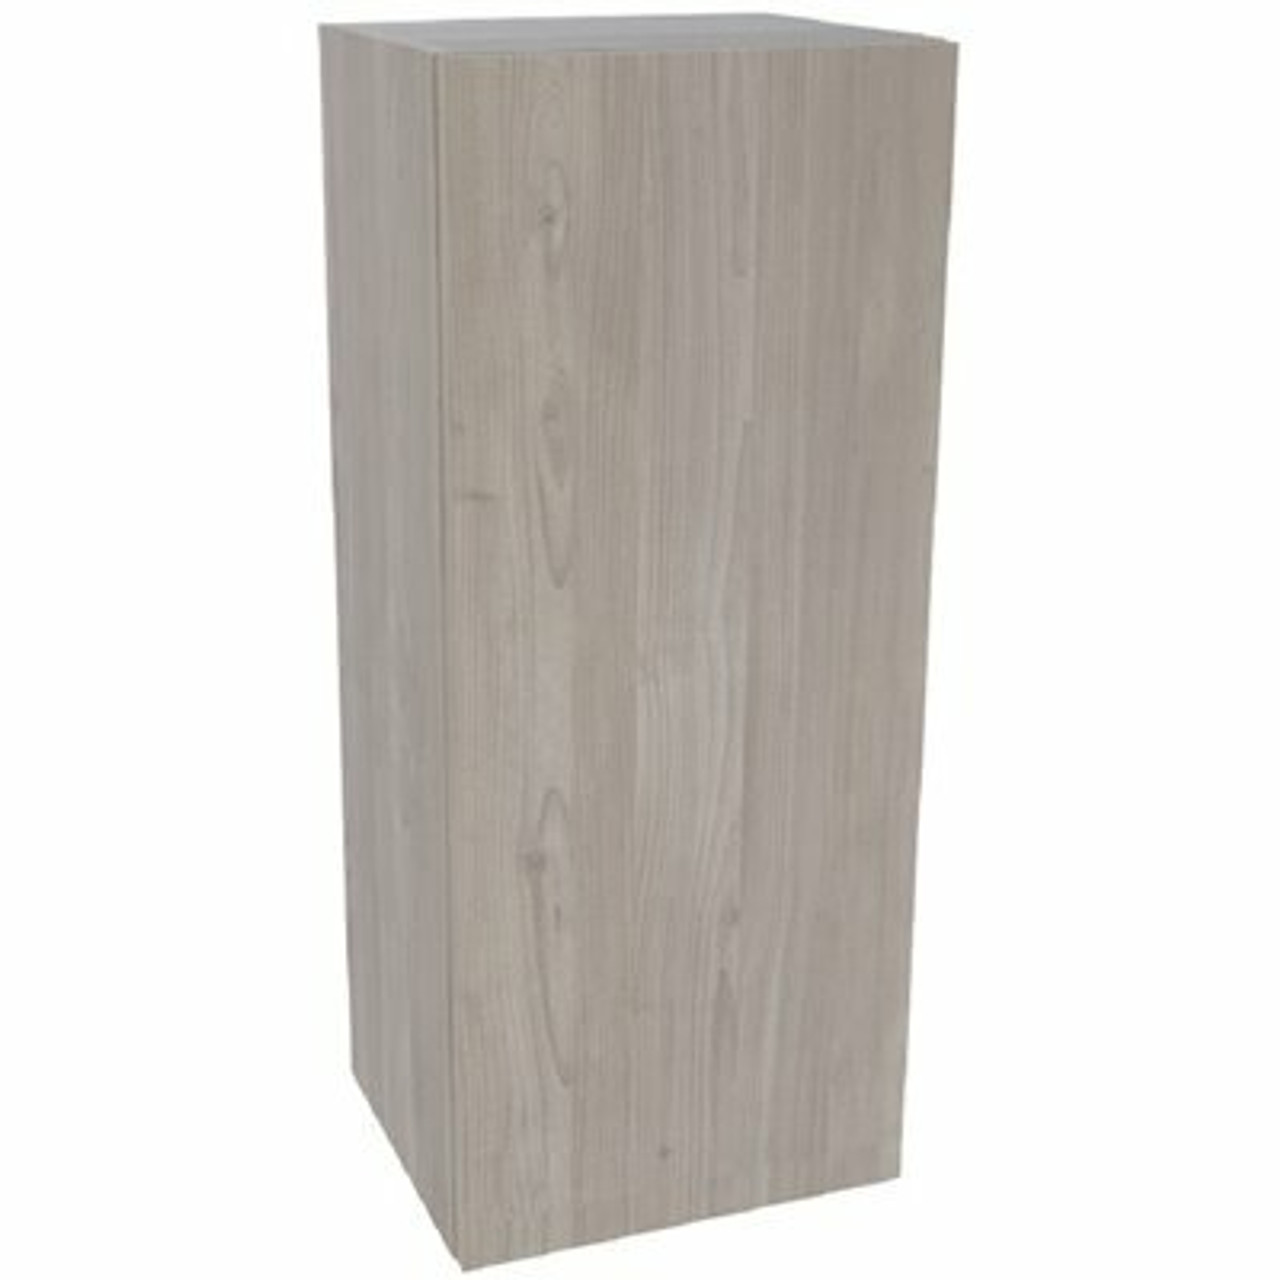 Cambridge Ready To Assemble Threespine 12 In. X 36 In. X 12 In. Stock Wall Cabinet In Grey Nordic